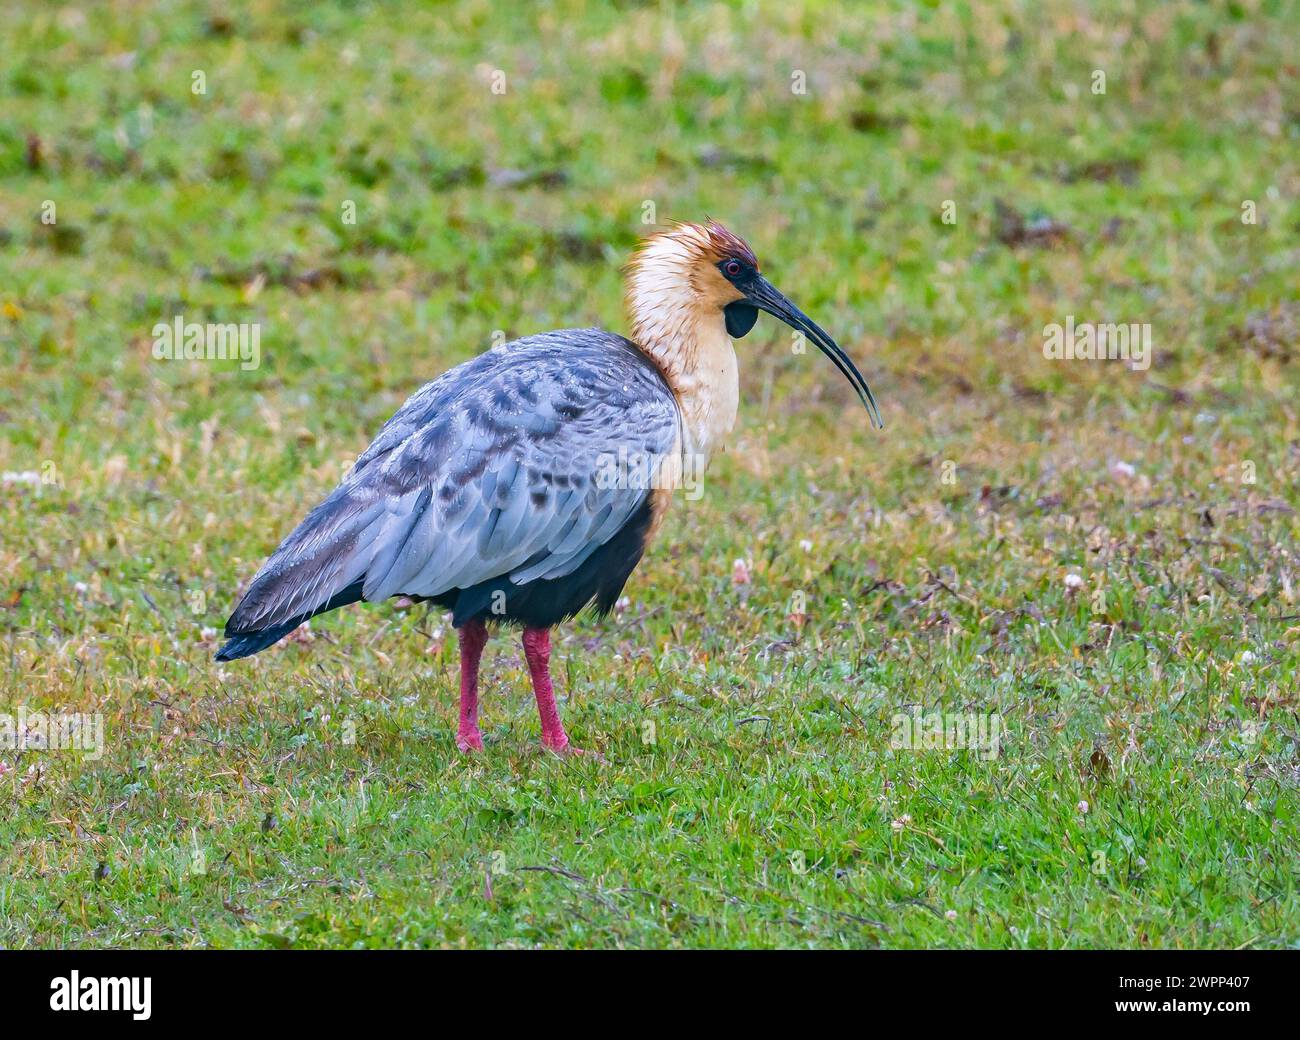 A Black-faced Ibis (Theristicus melanopis) walking on green grass. Ushuaia, Tierra del Fuego National Park, Argentina. Stock Photo